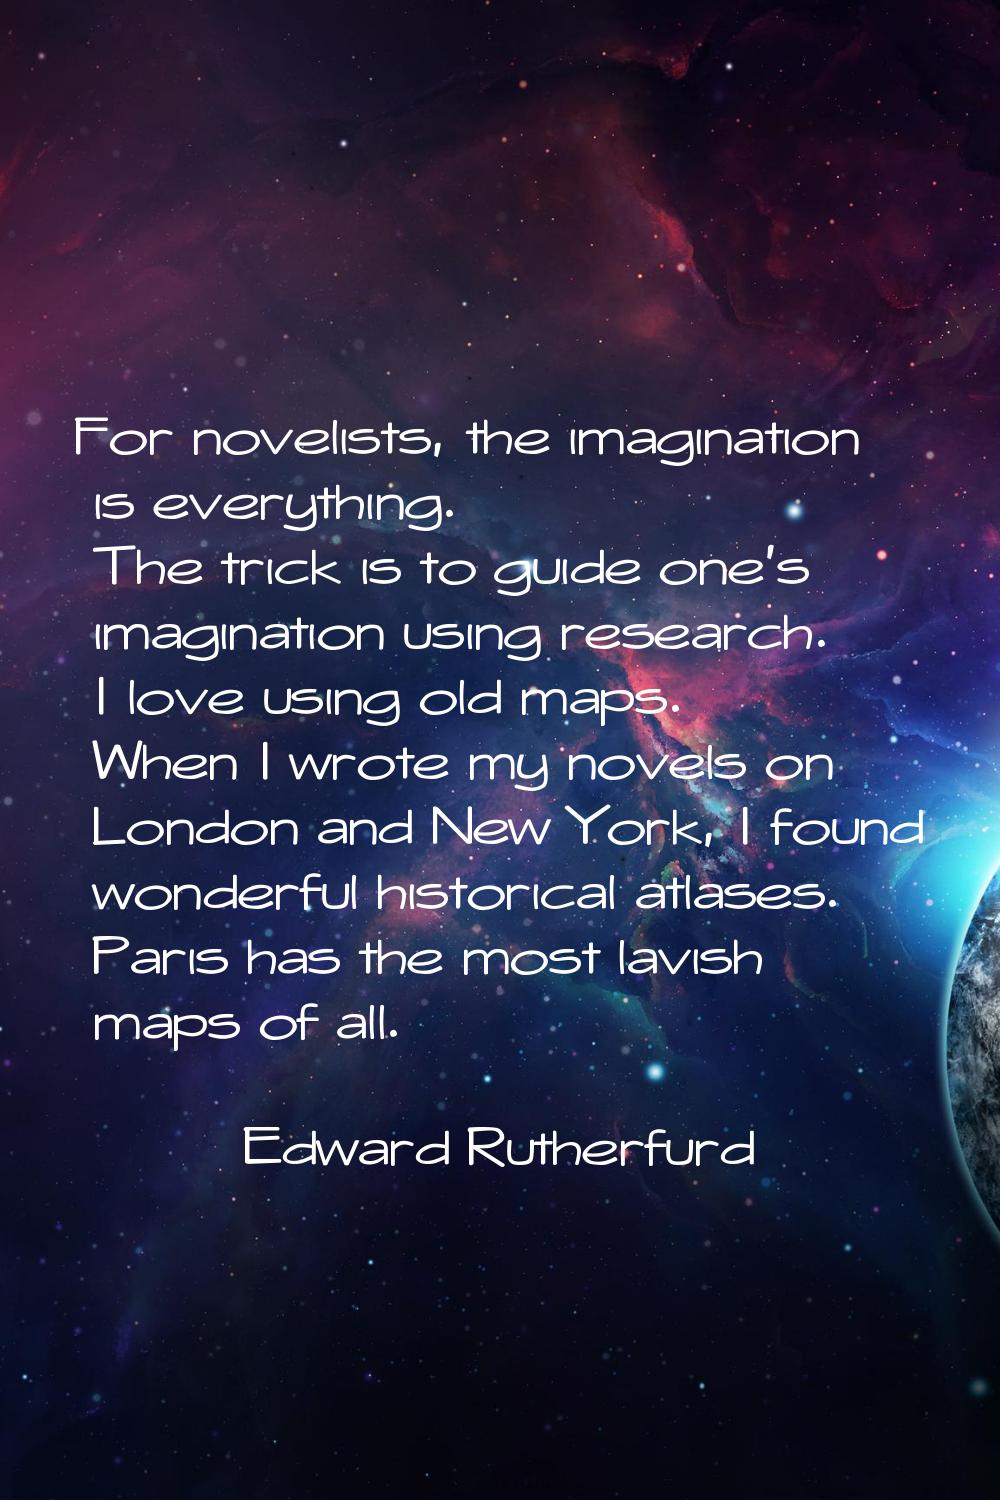 For novelists, the imagination is everything. The trick is to guide one's imagination using researc